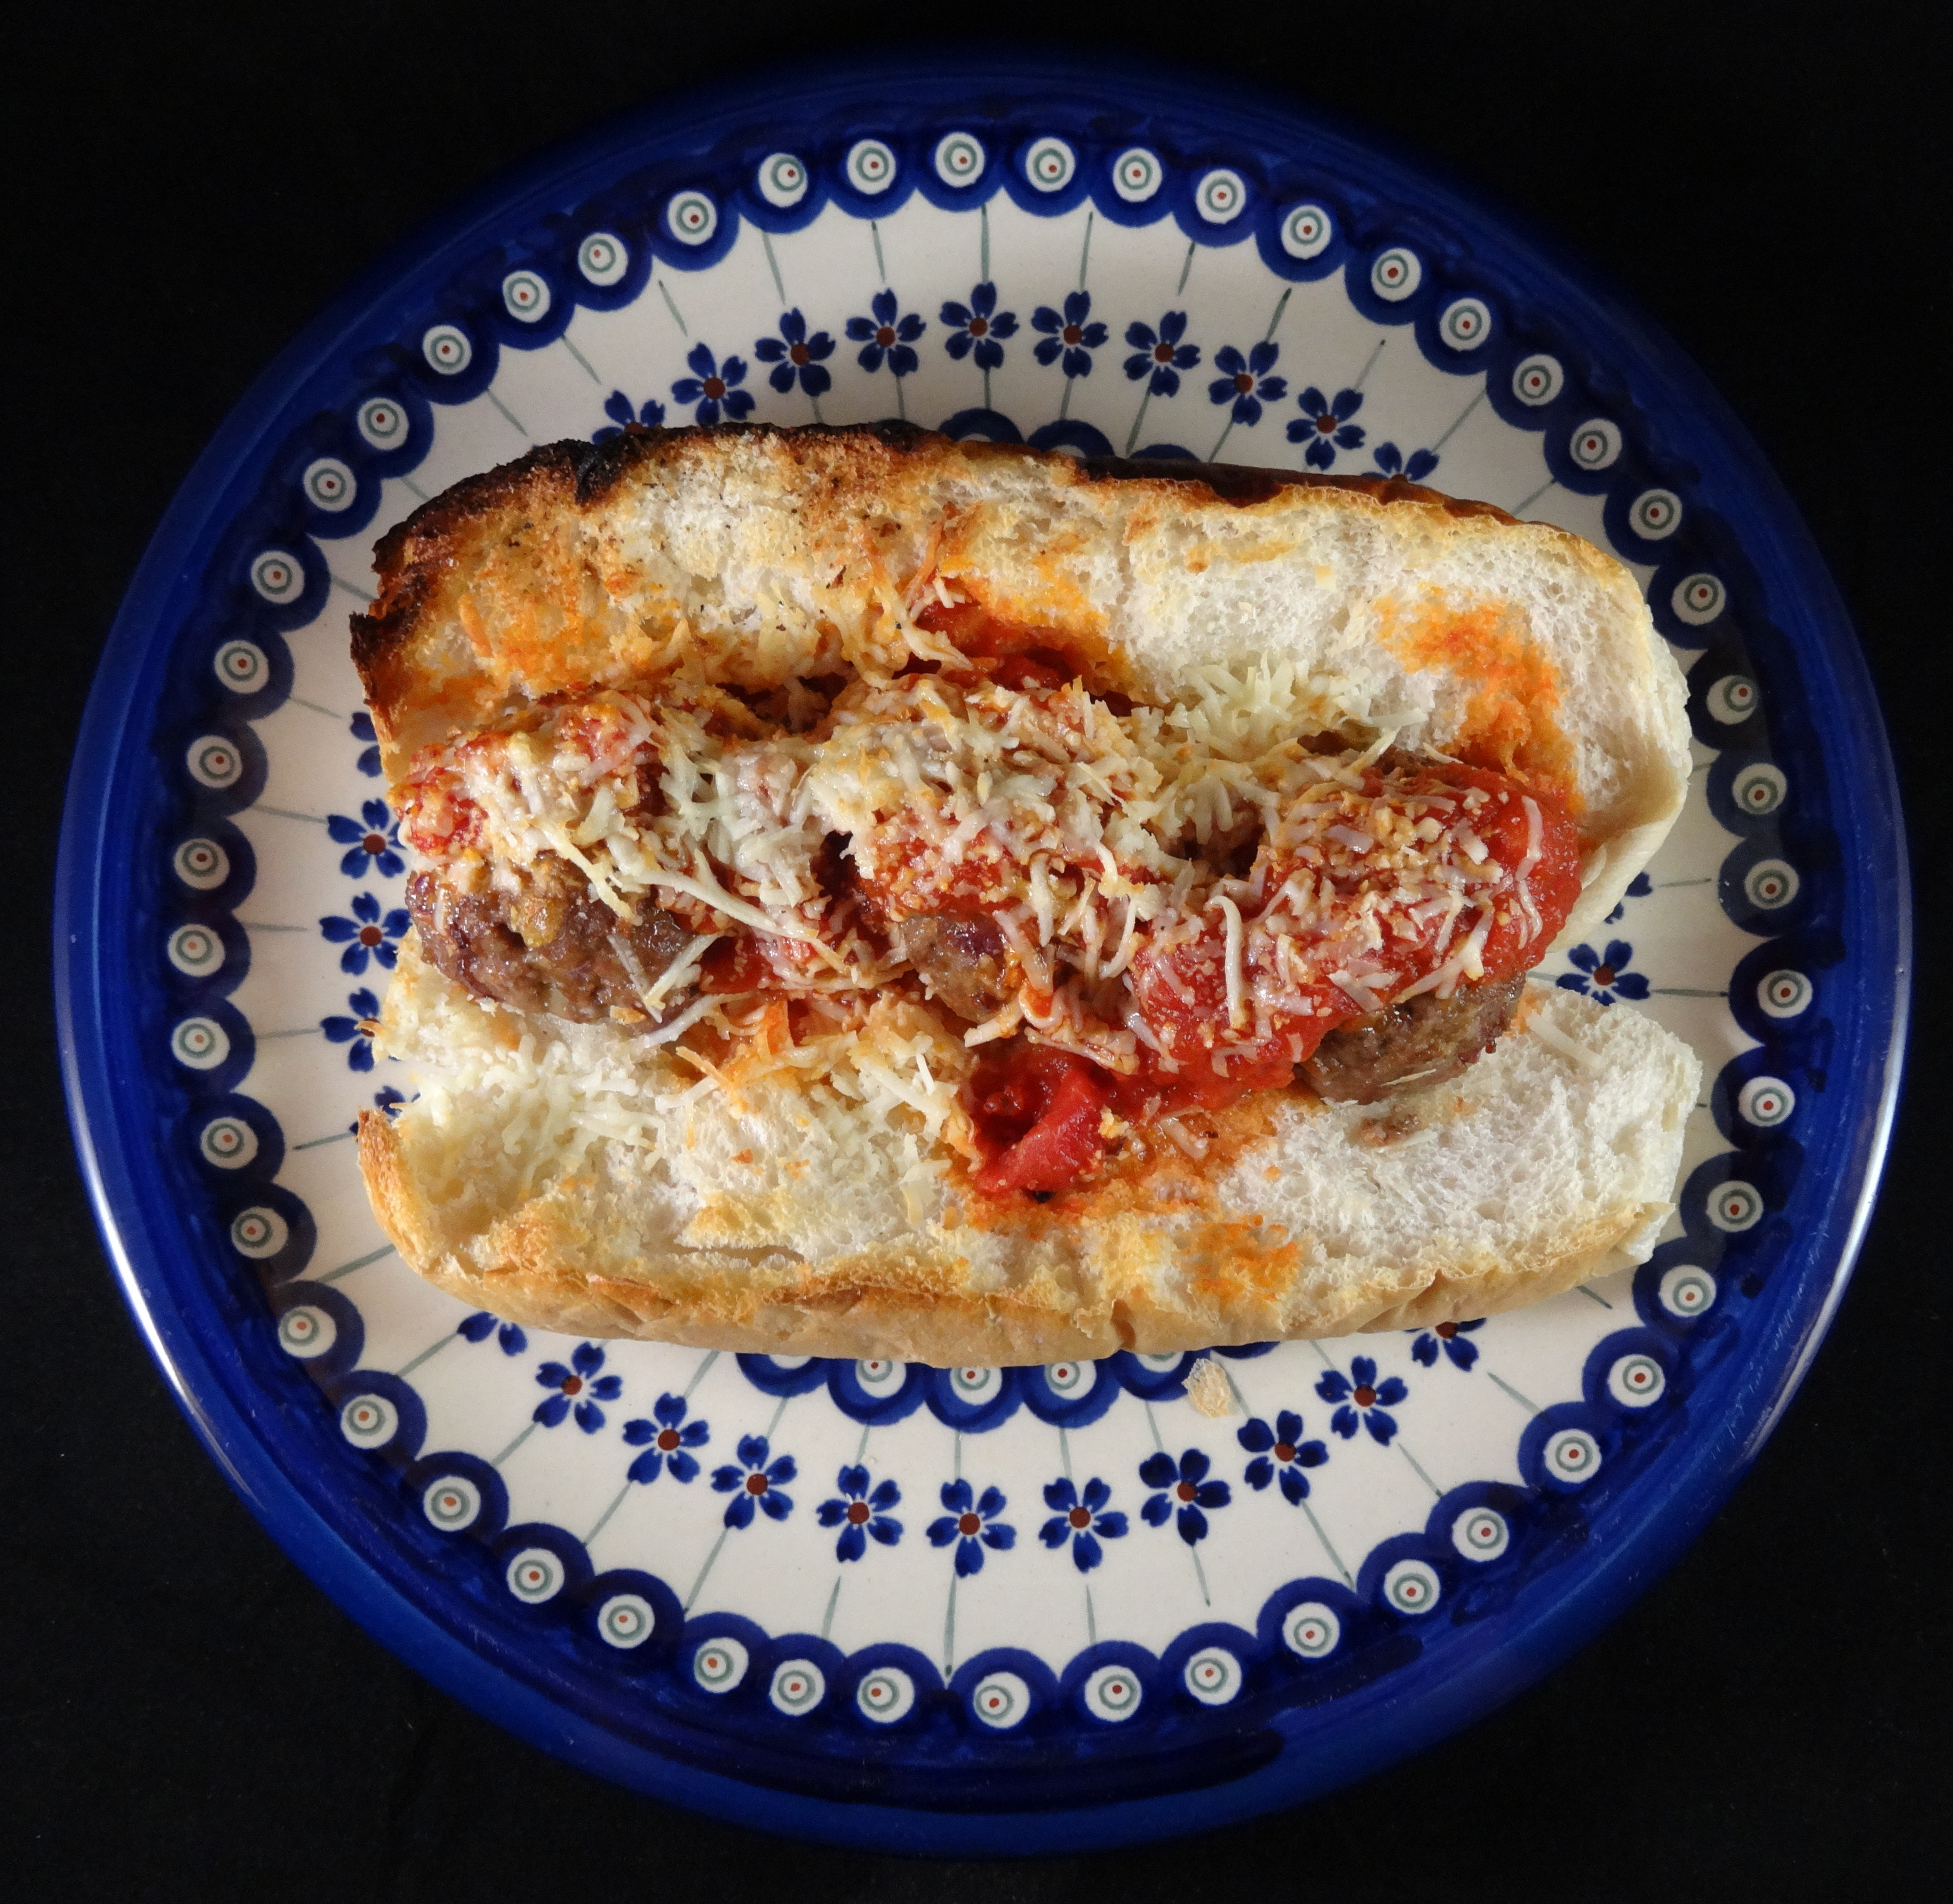 Meatball sub recipe picture. Get a better internet connection so you can see this pic.